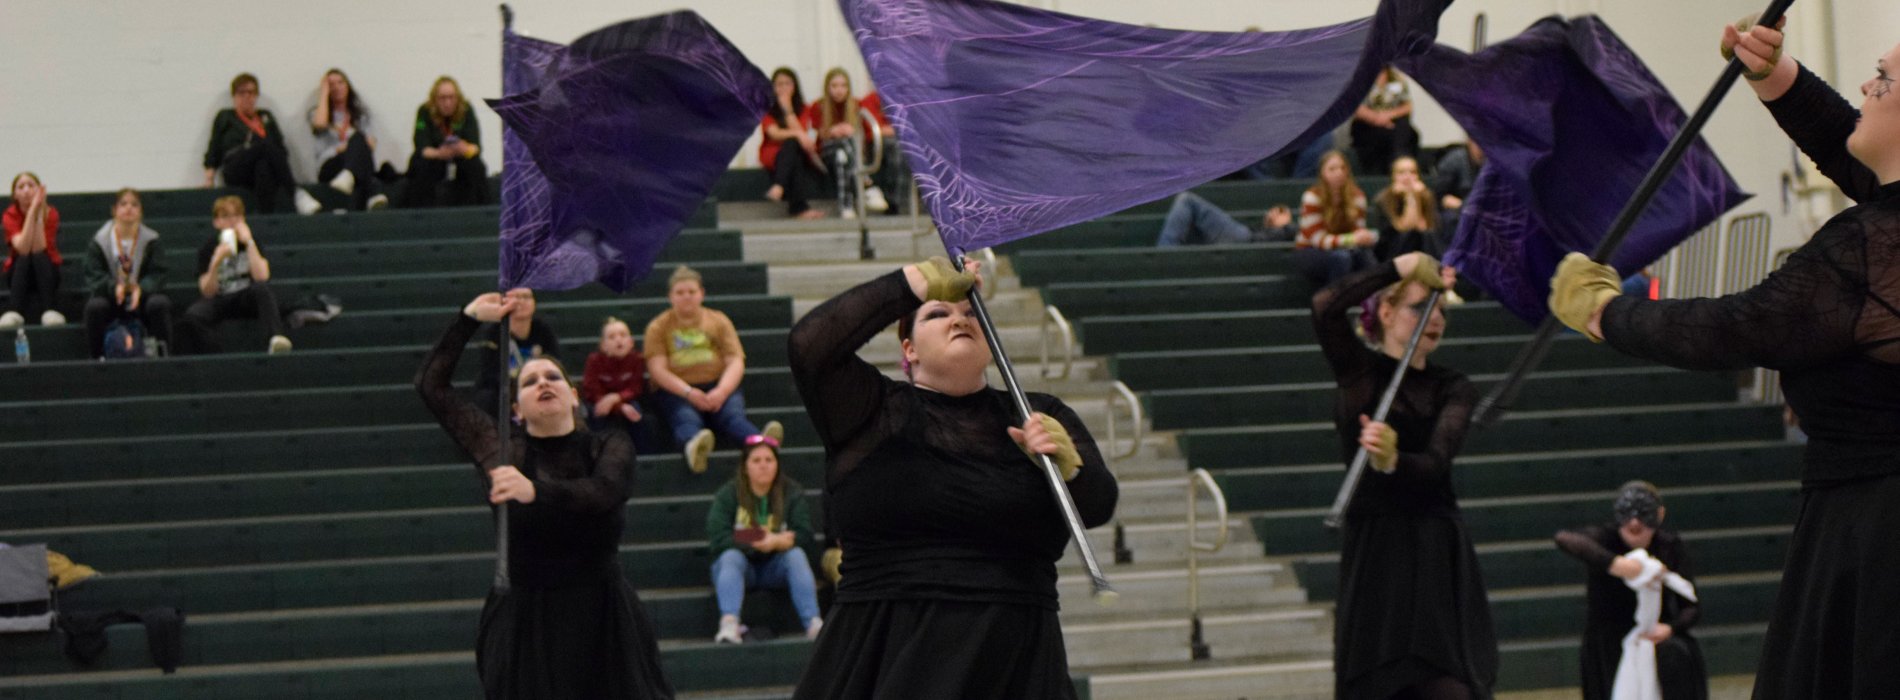 The UAlbany Winter Guard performs with all black costumes and purple flags inside a gymnasium.